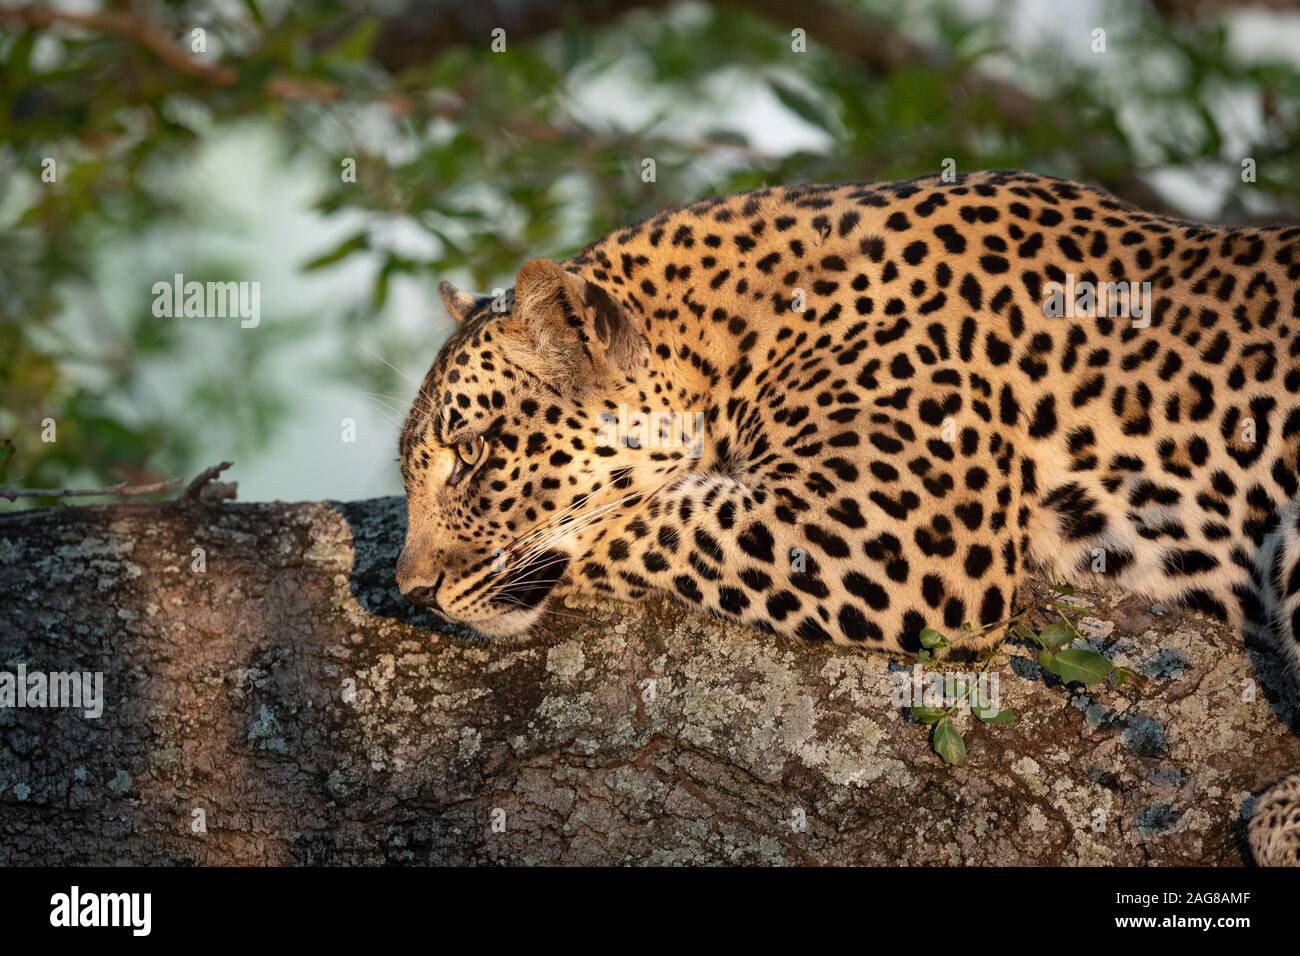 African Leopard lying in a tree resting, Kruger National Park, South Africa Stock Photo